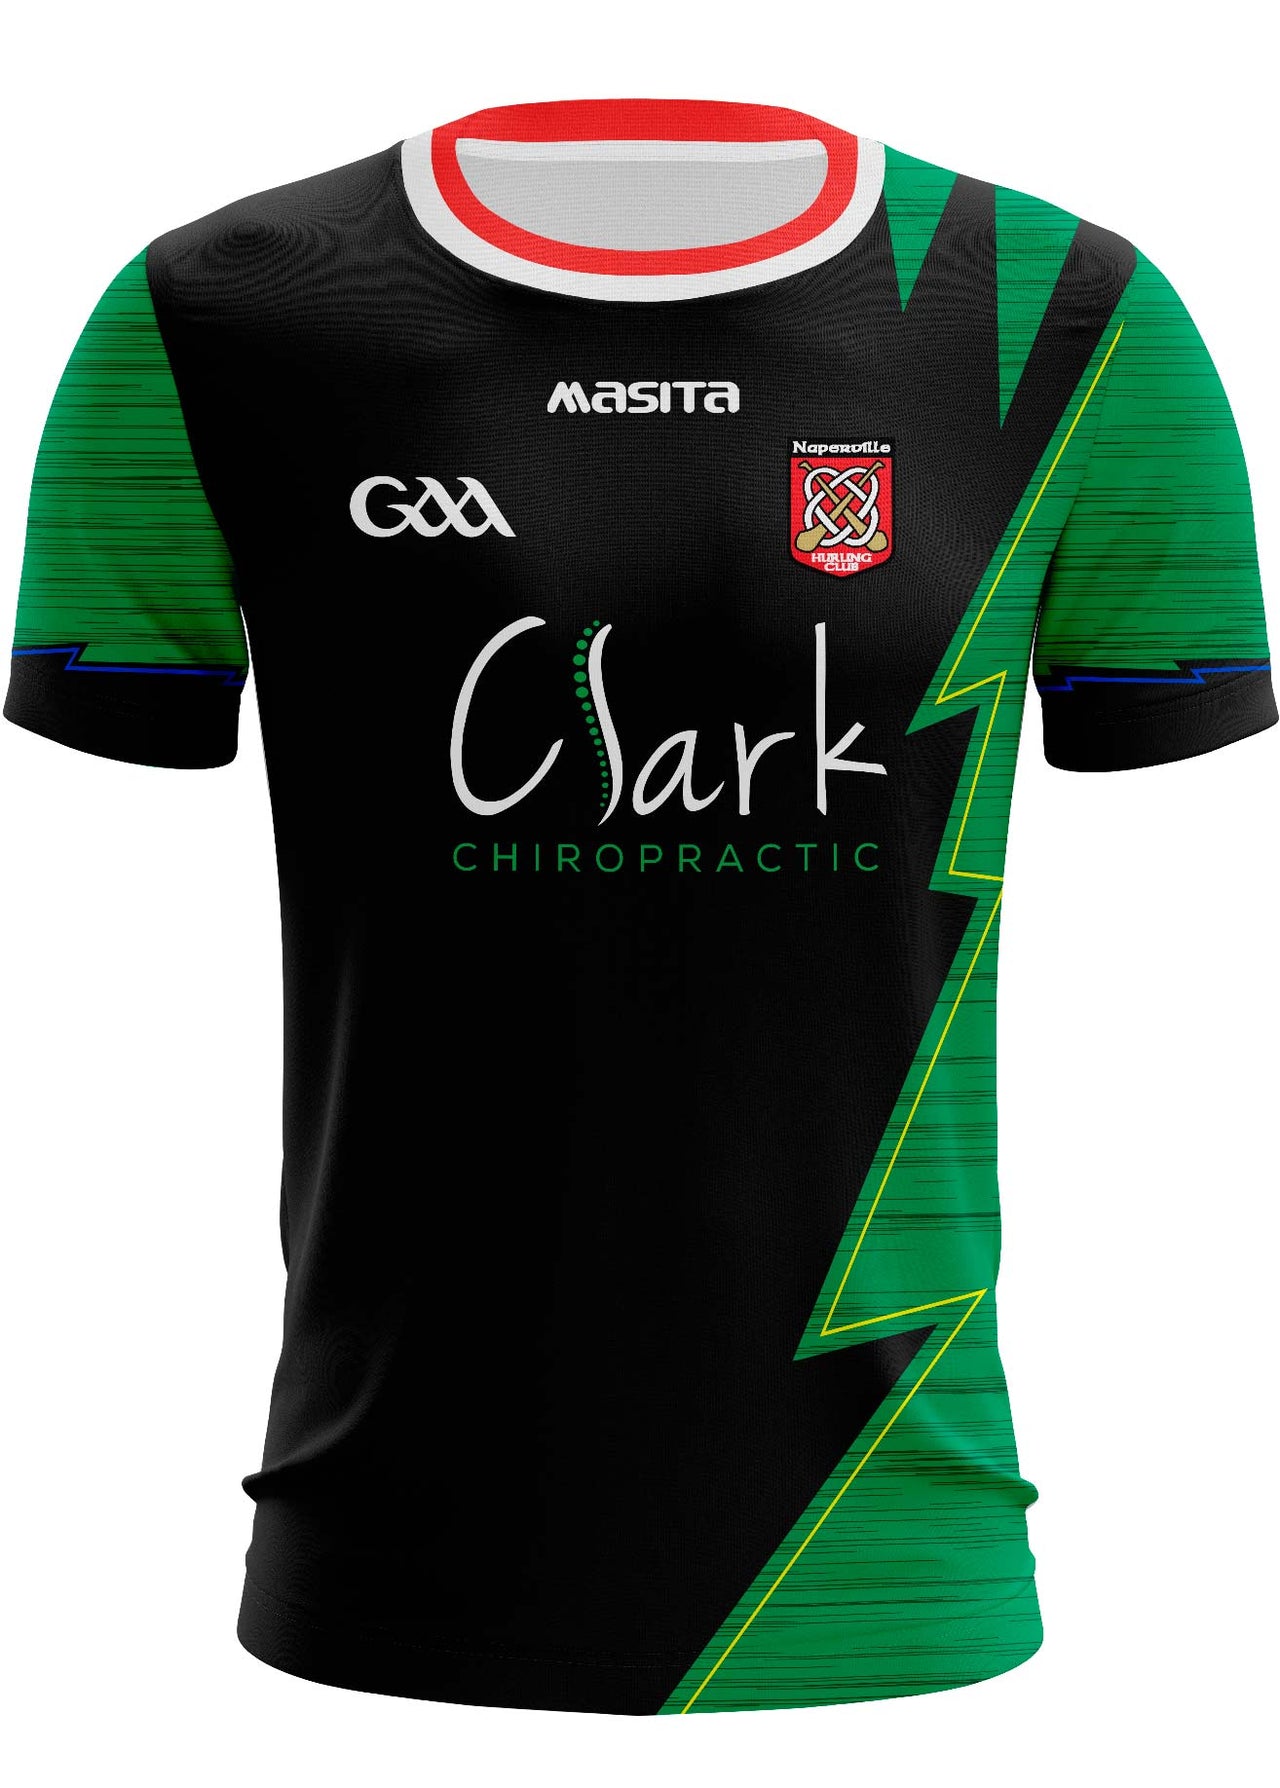 Naperville Hurling Club Clarke Black/Green Jersey Player Fit Adult